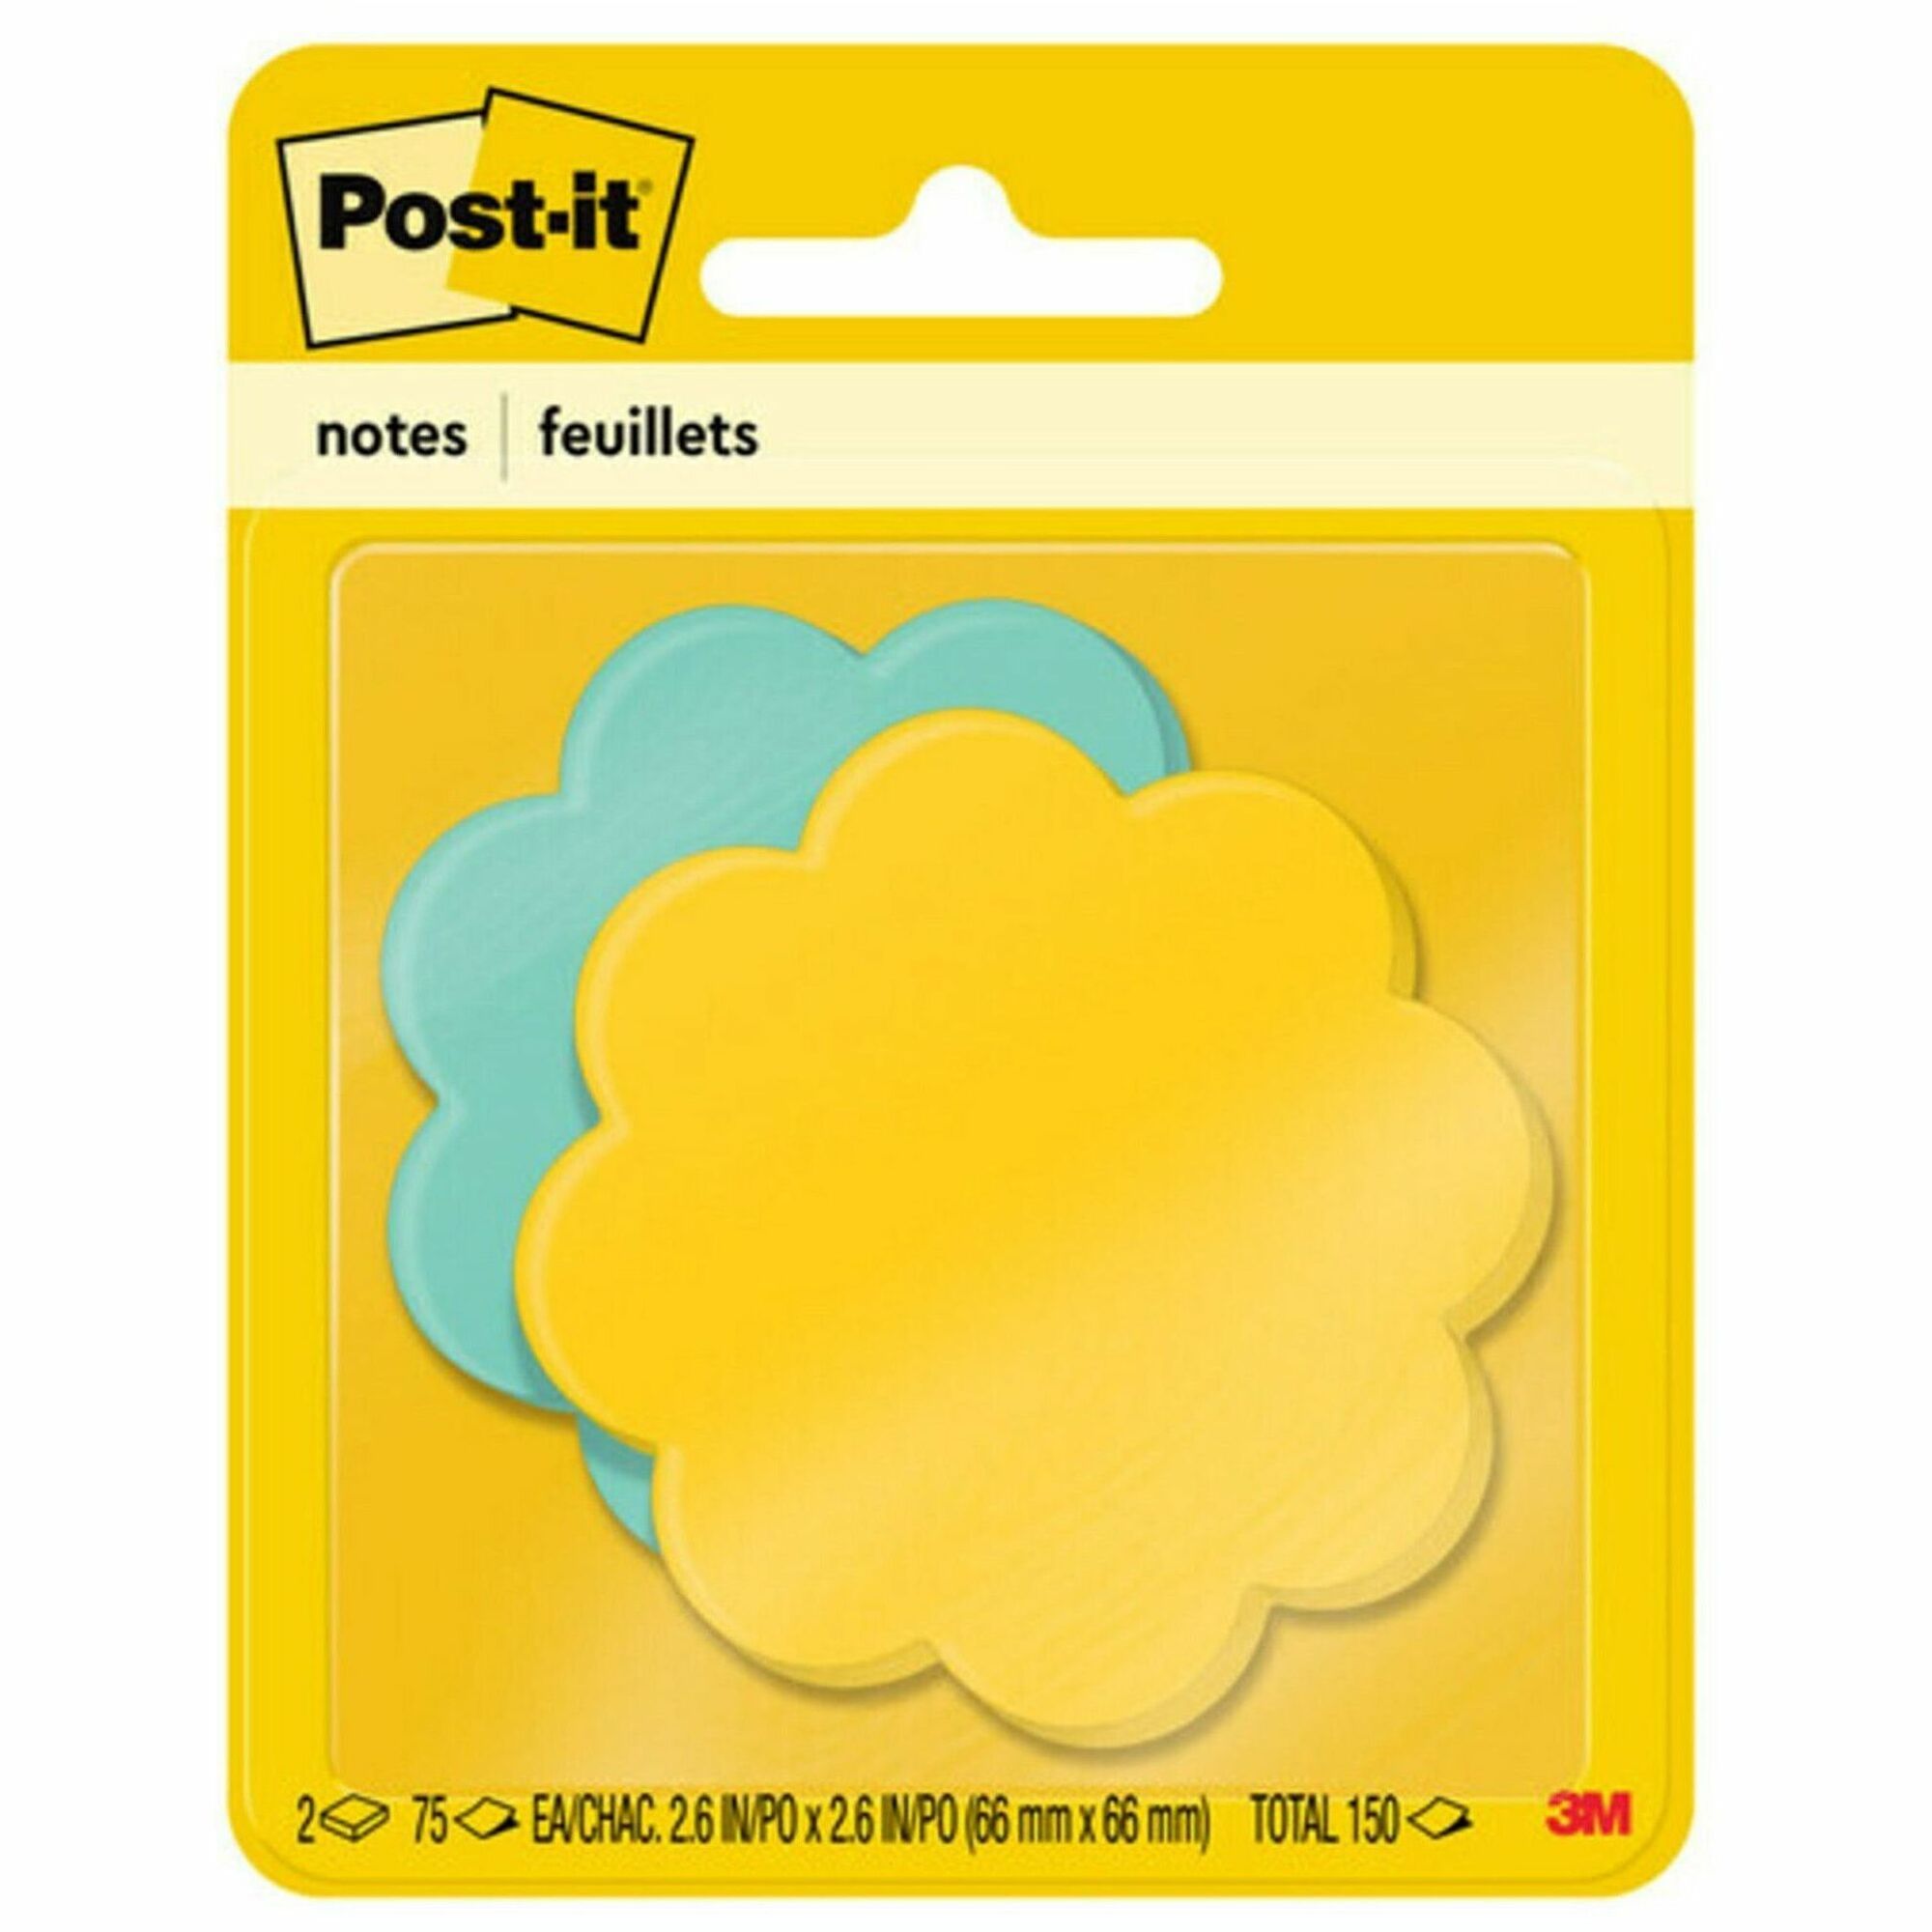 Post-it Super Sticky Die-Cut Notes - 150 x Assorted - 3" x 3" - Daisy - Yellow, Blue - Self-adhesive - 2 / Pack - 1